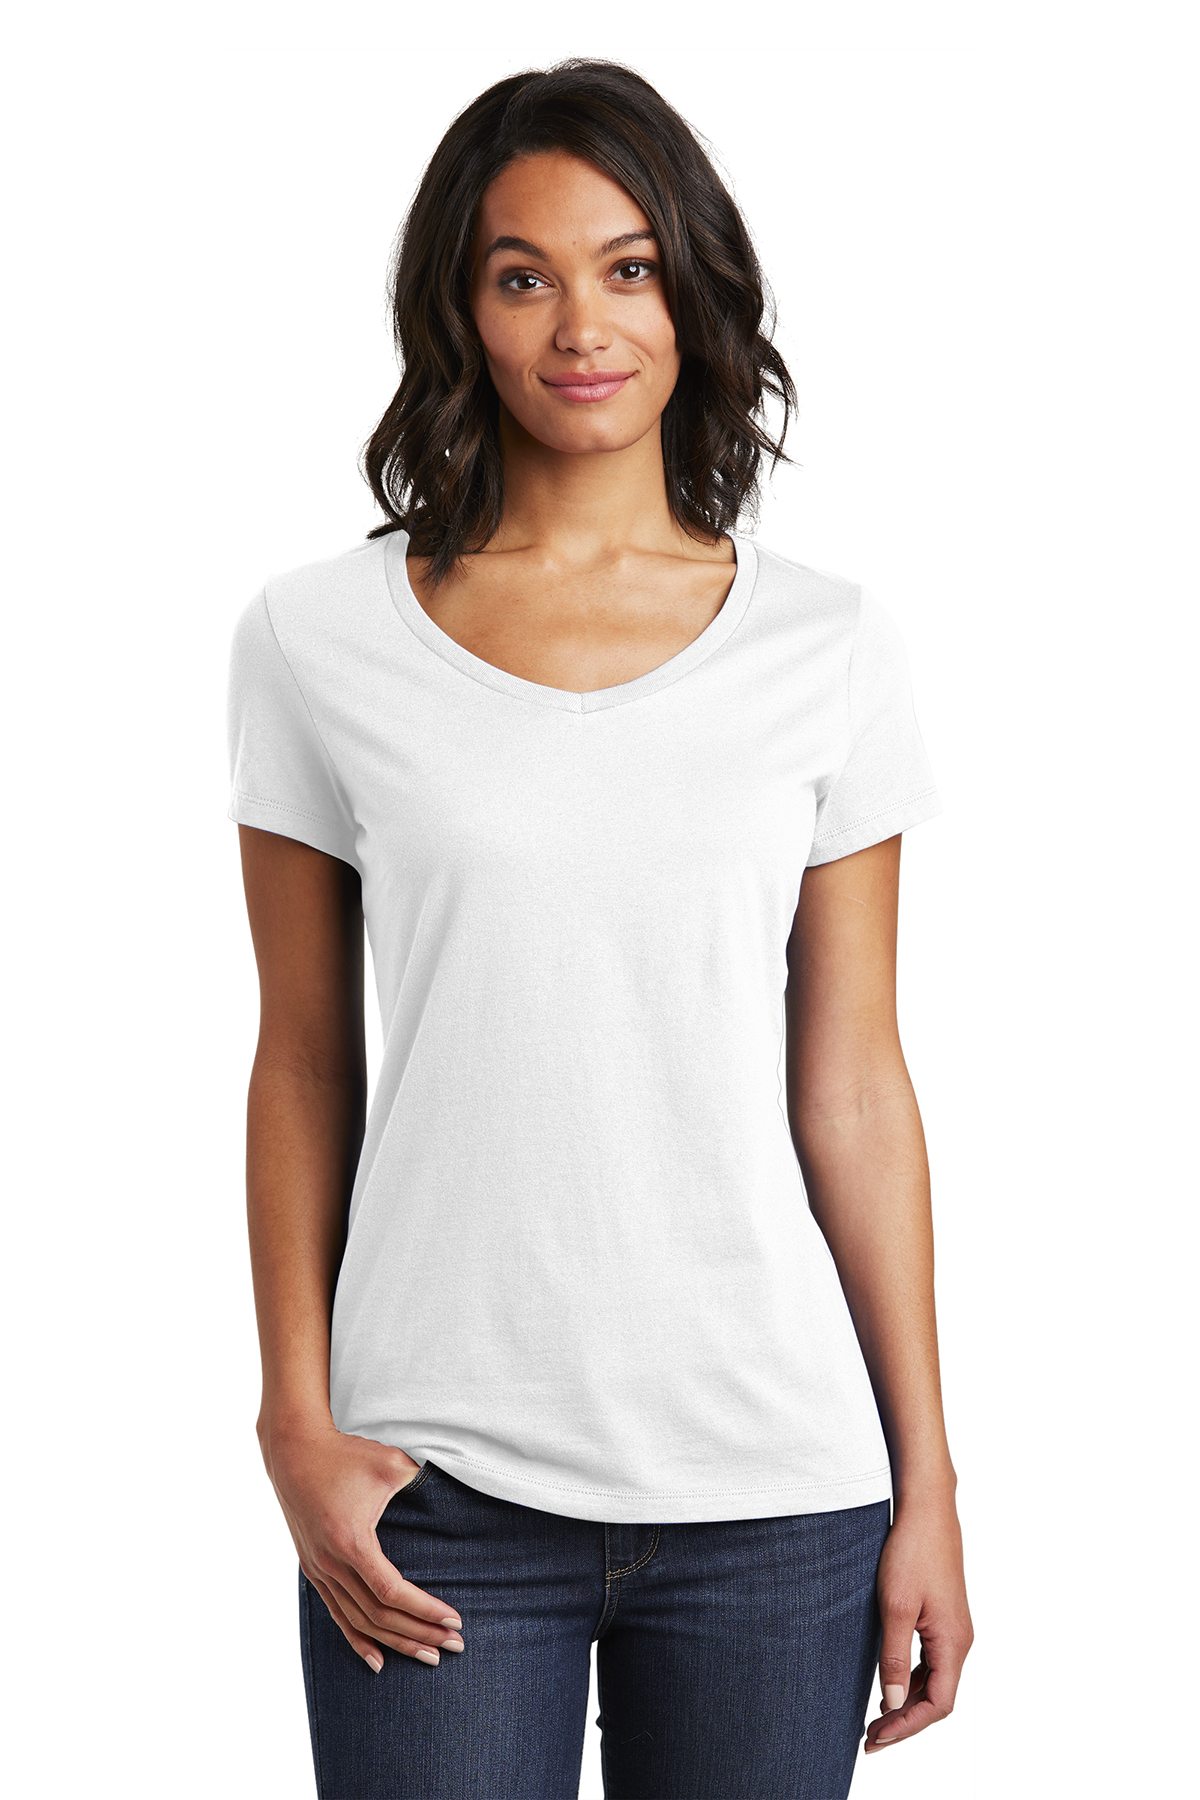 District DT6503 - Women's Very Important Tee V-Neck